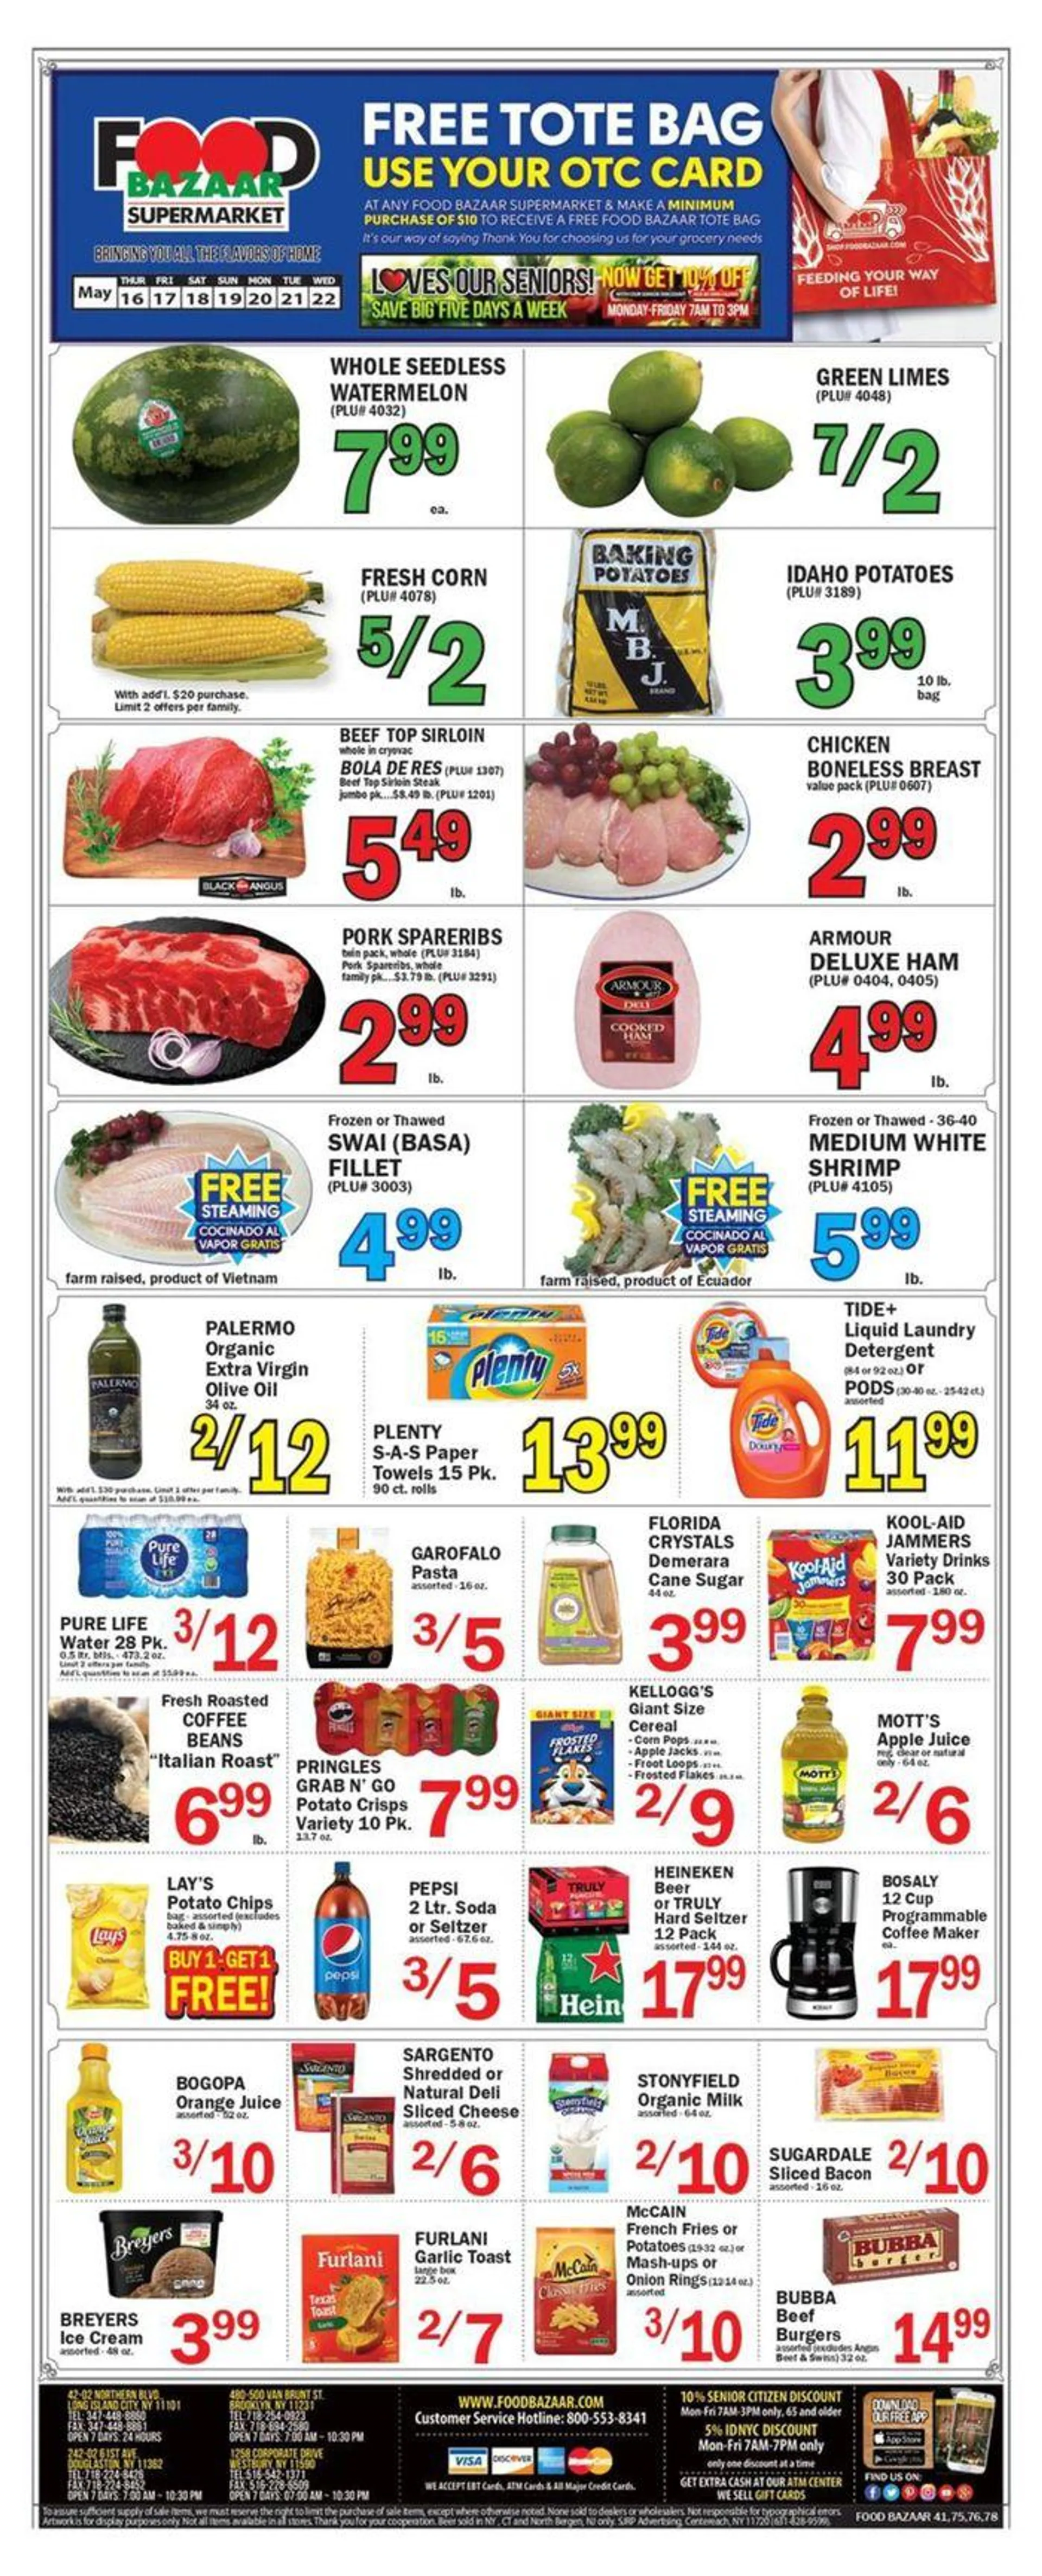 New weekly ad - 1